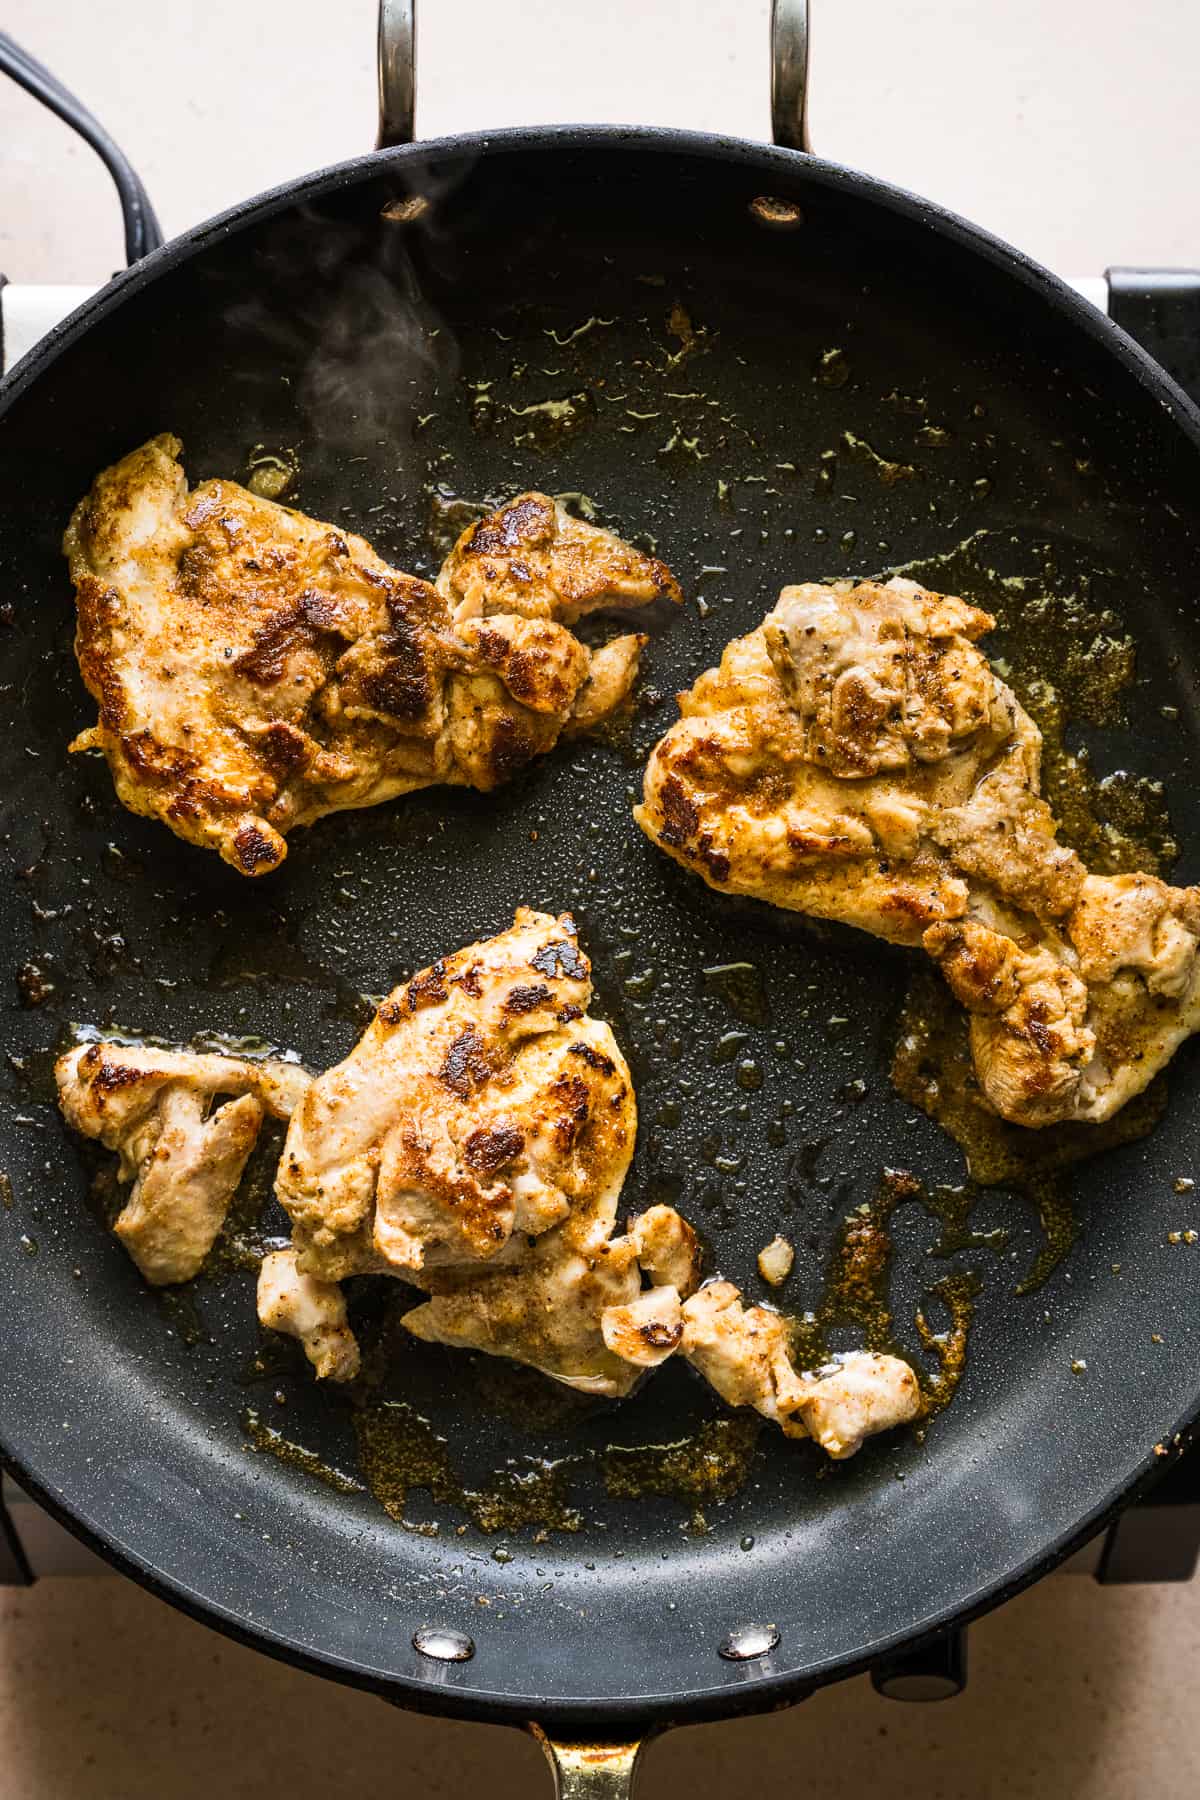 Chicken being cooked in a skillet.